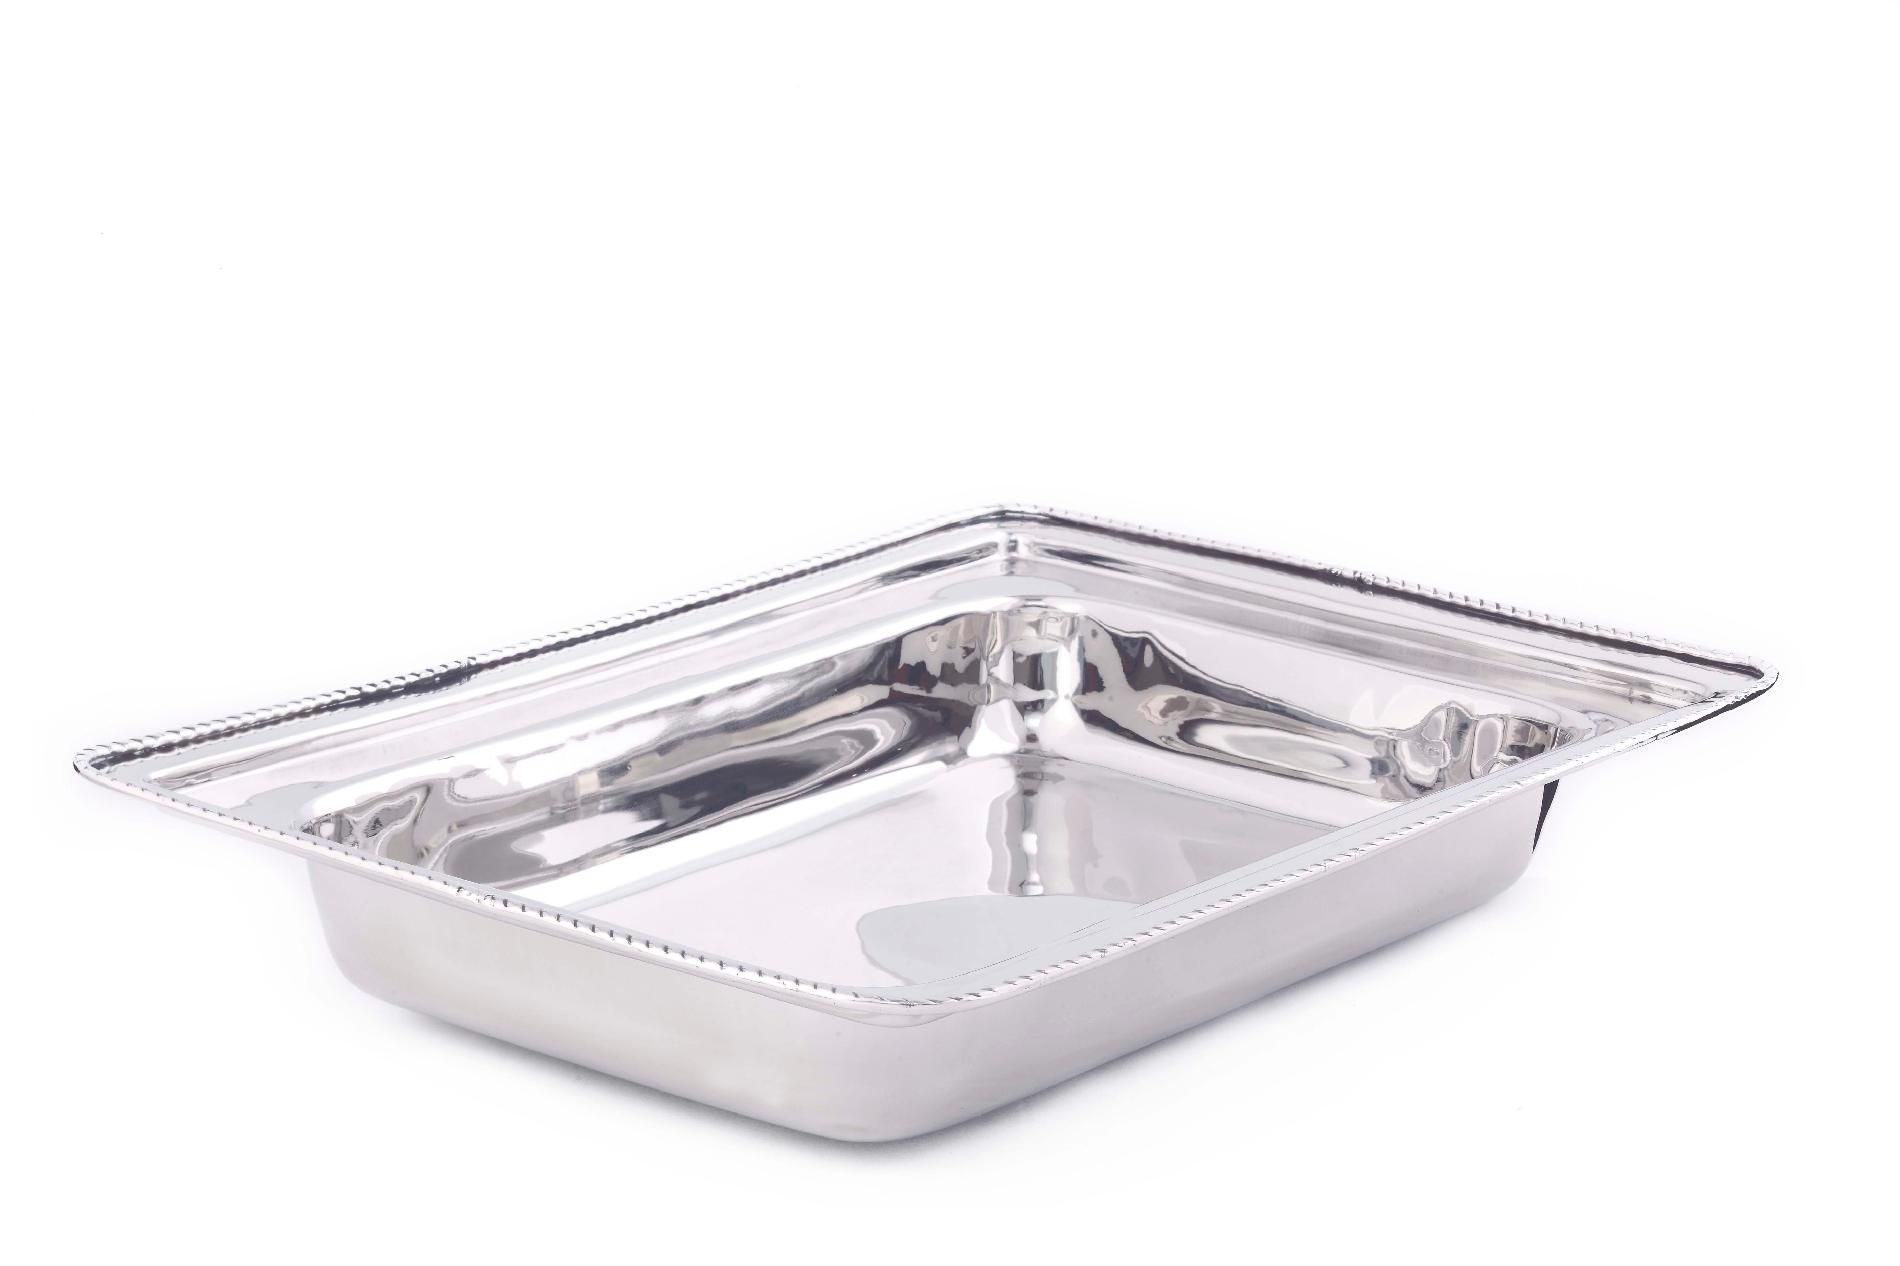 Old Dutch International FP683 Stainless Steel Food Pan for Chafing Dish #683